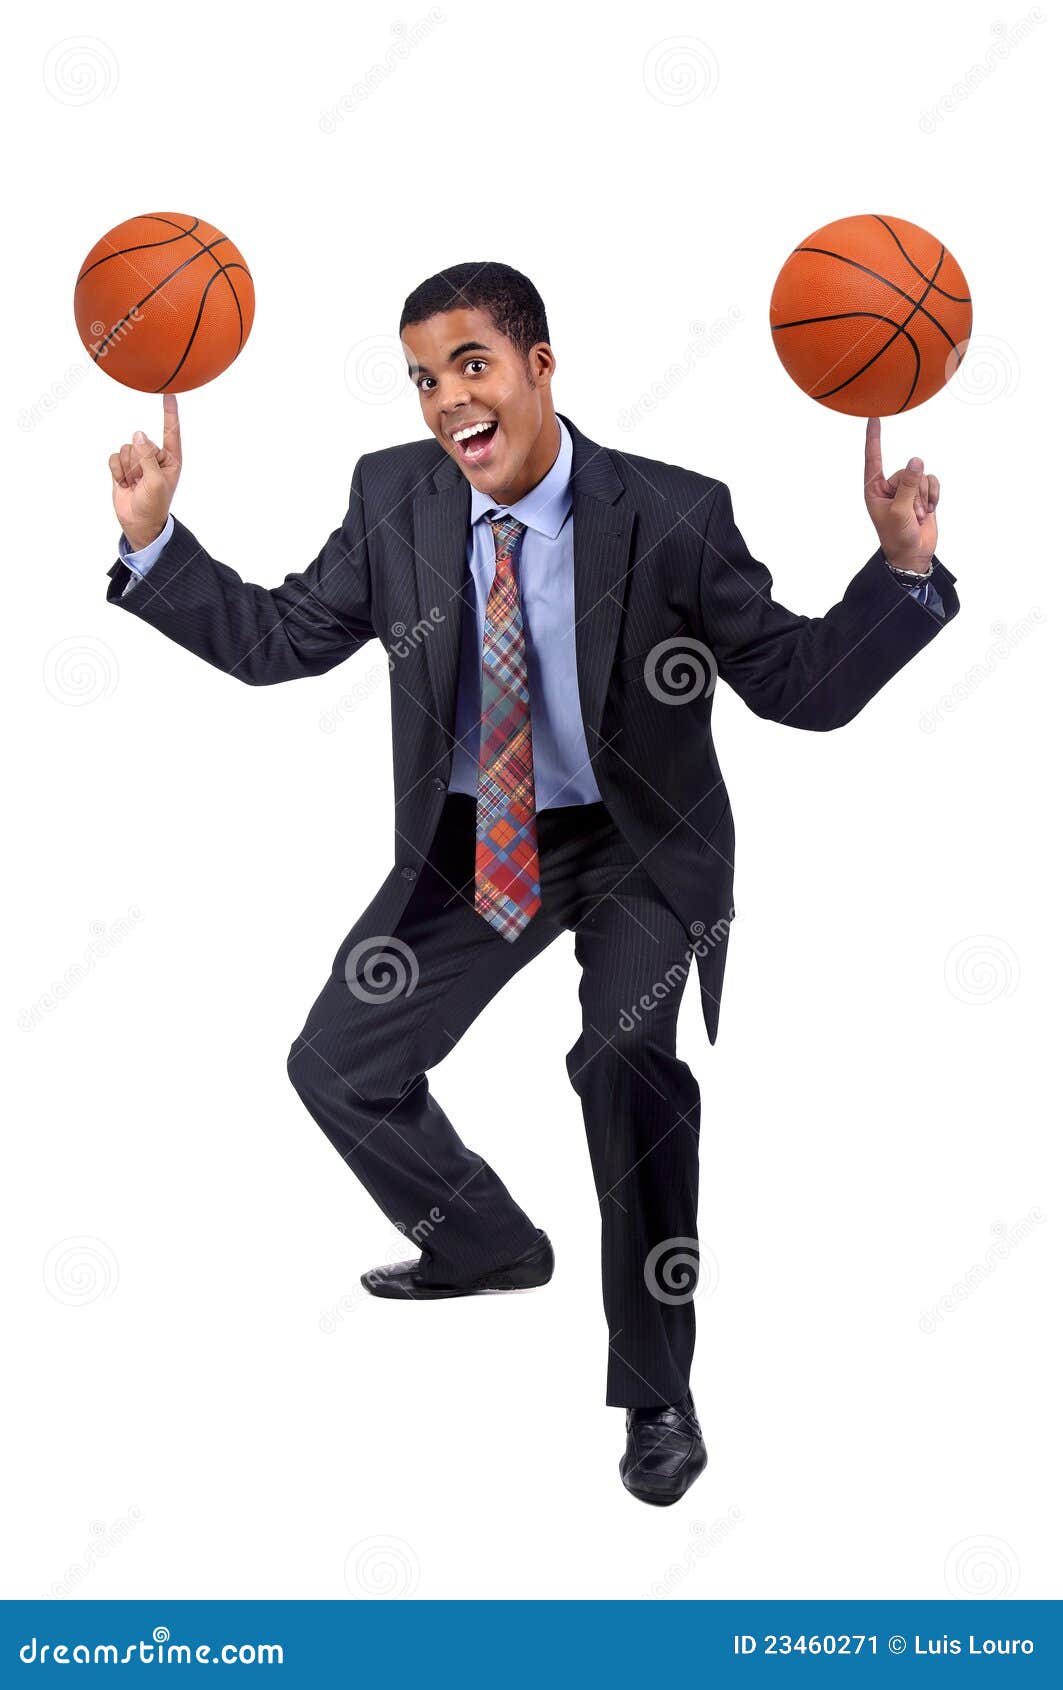 Basket stock image. Image of african, expression, supporter - 23460271